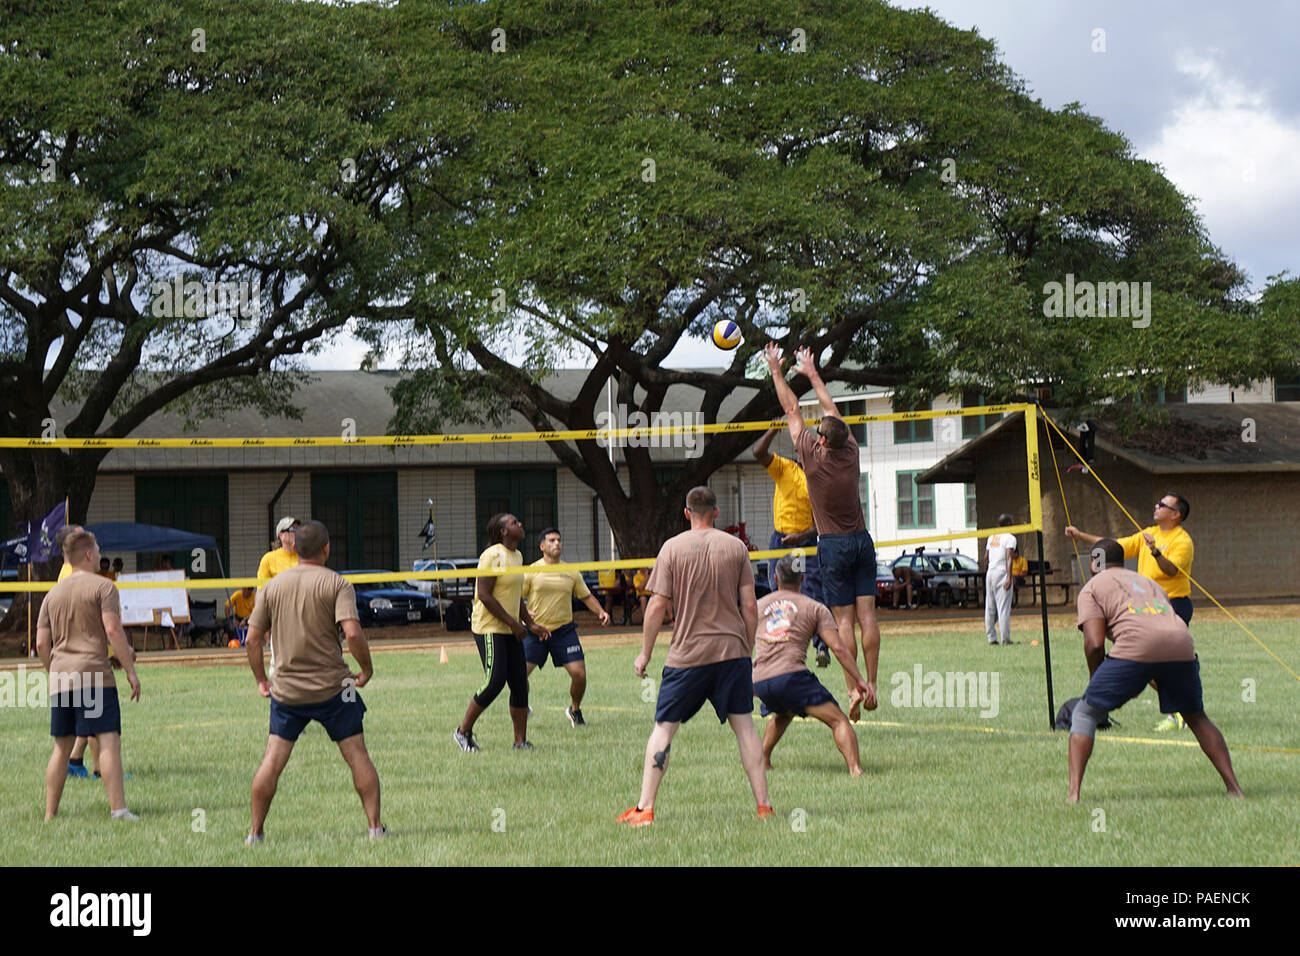 PEARL HARBOR-HICKAM, Hawaii (Feb. 19, 2016) Various competitive events between the four teams were held throughout the day which included a creative construction project, fit games (push-ups/burpees/nail drive/tire flip/sit ups/1 lap), basketball shoot-out, frisbee, volleyball, humvee push, and tug of war. Stock Photo